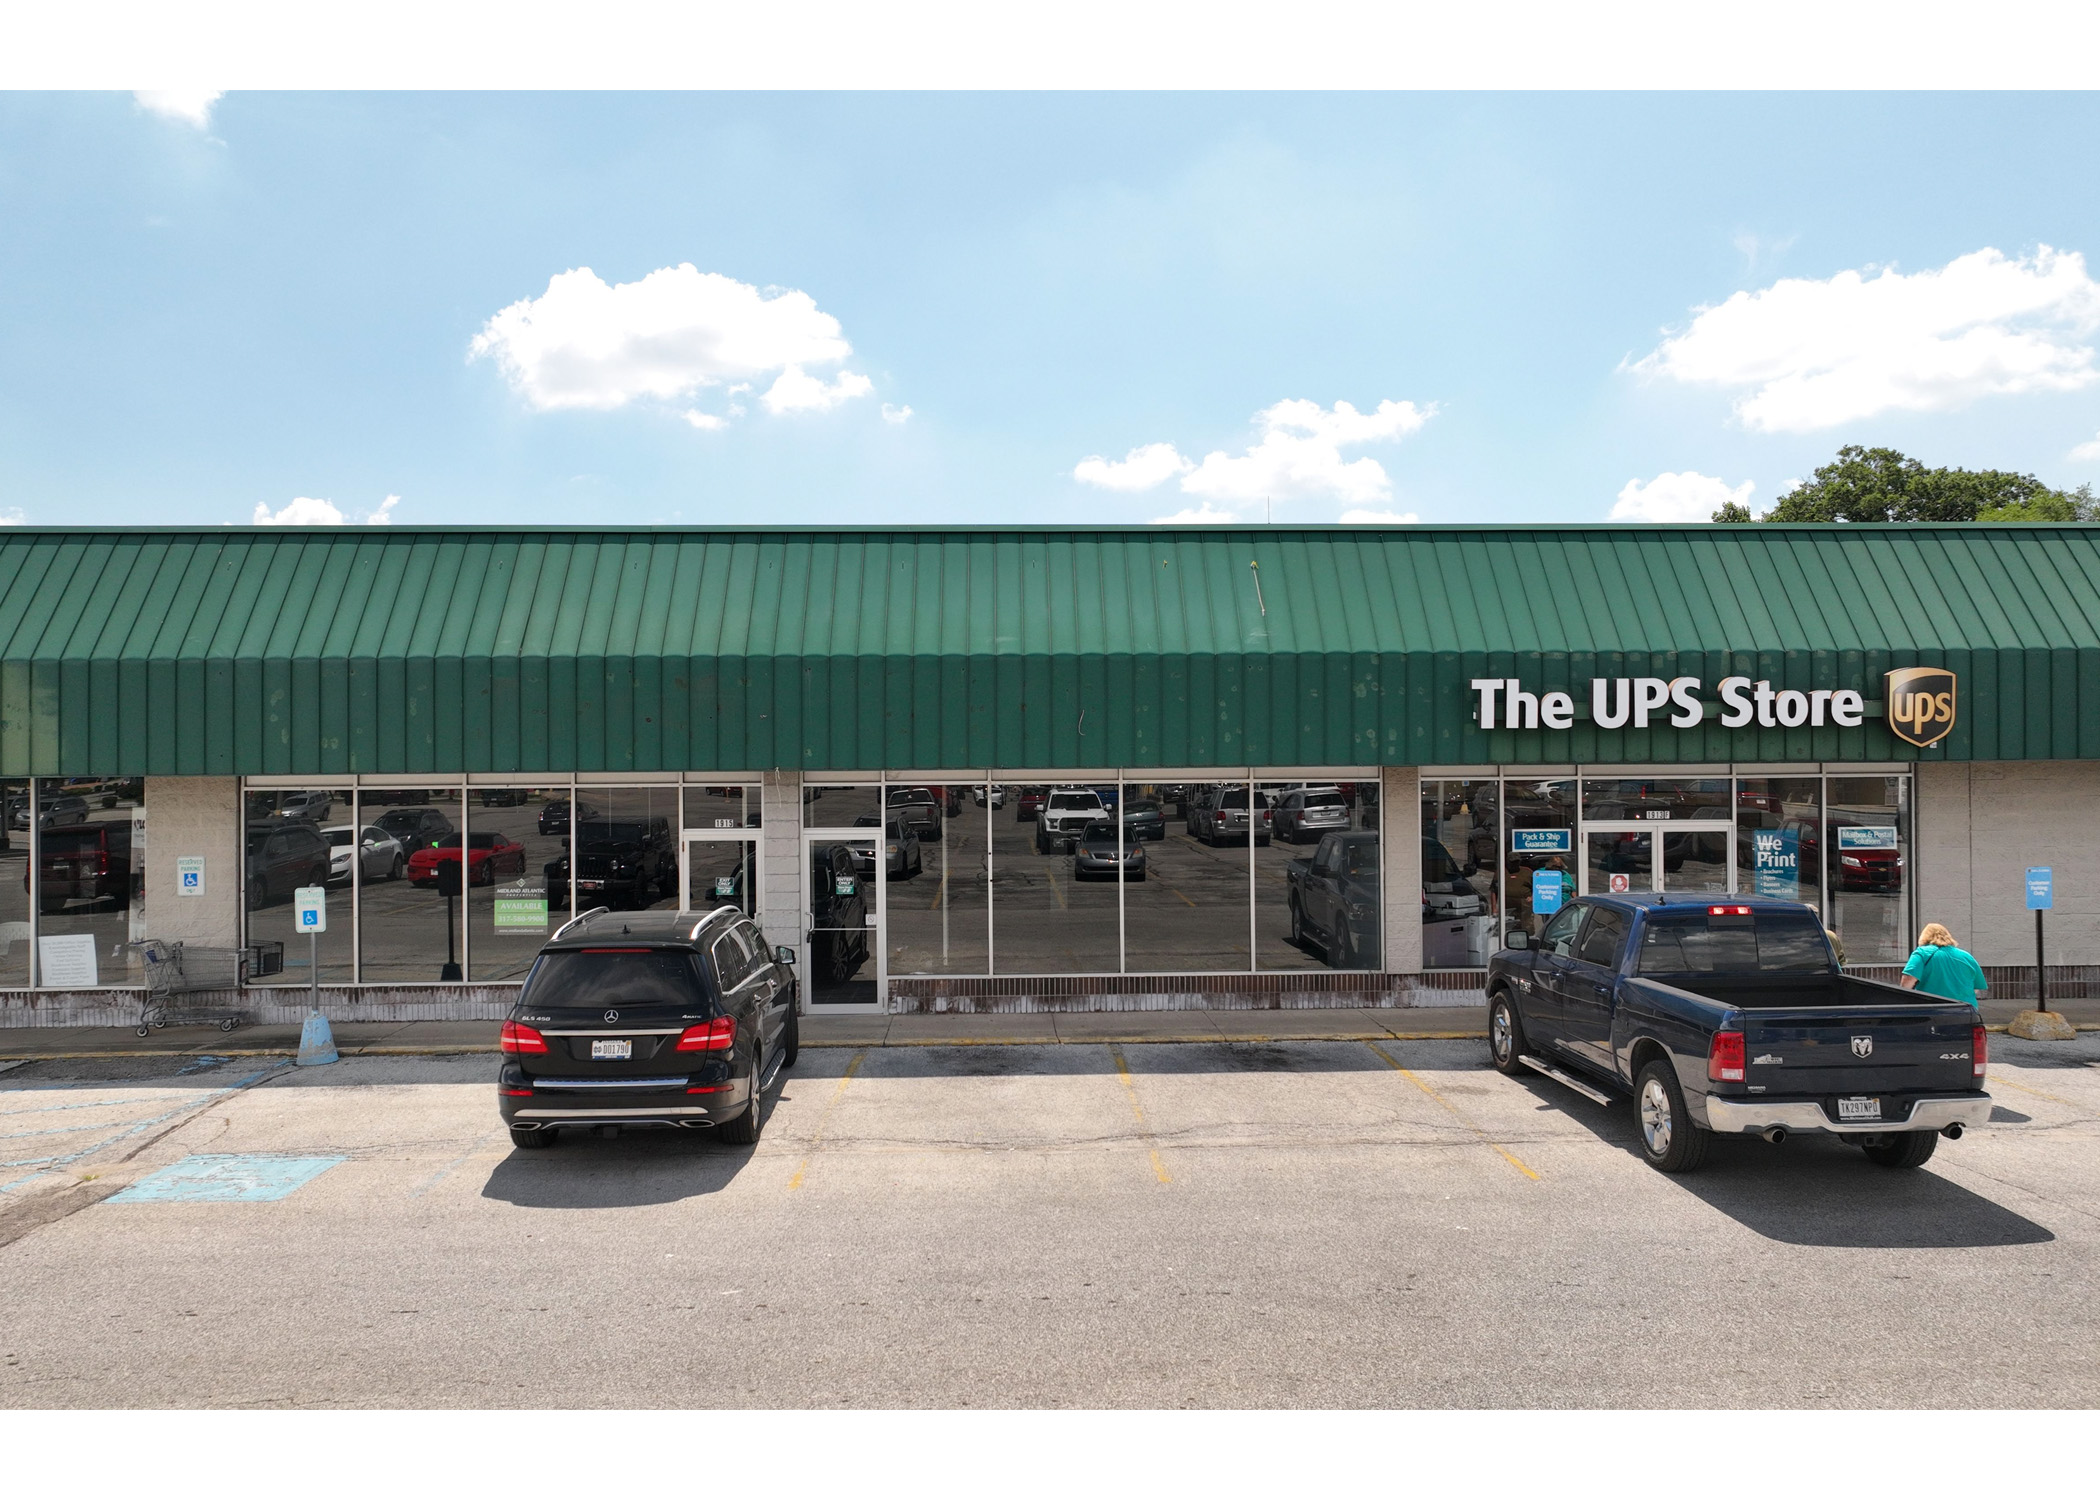 Plymouth Plaza, UPS Store front entrance